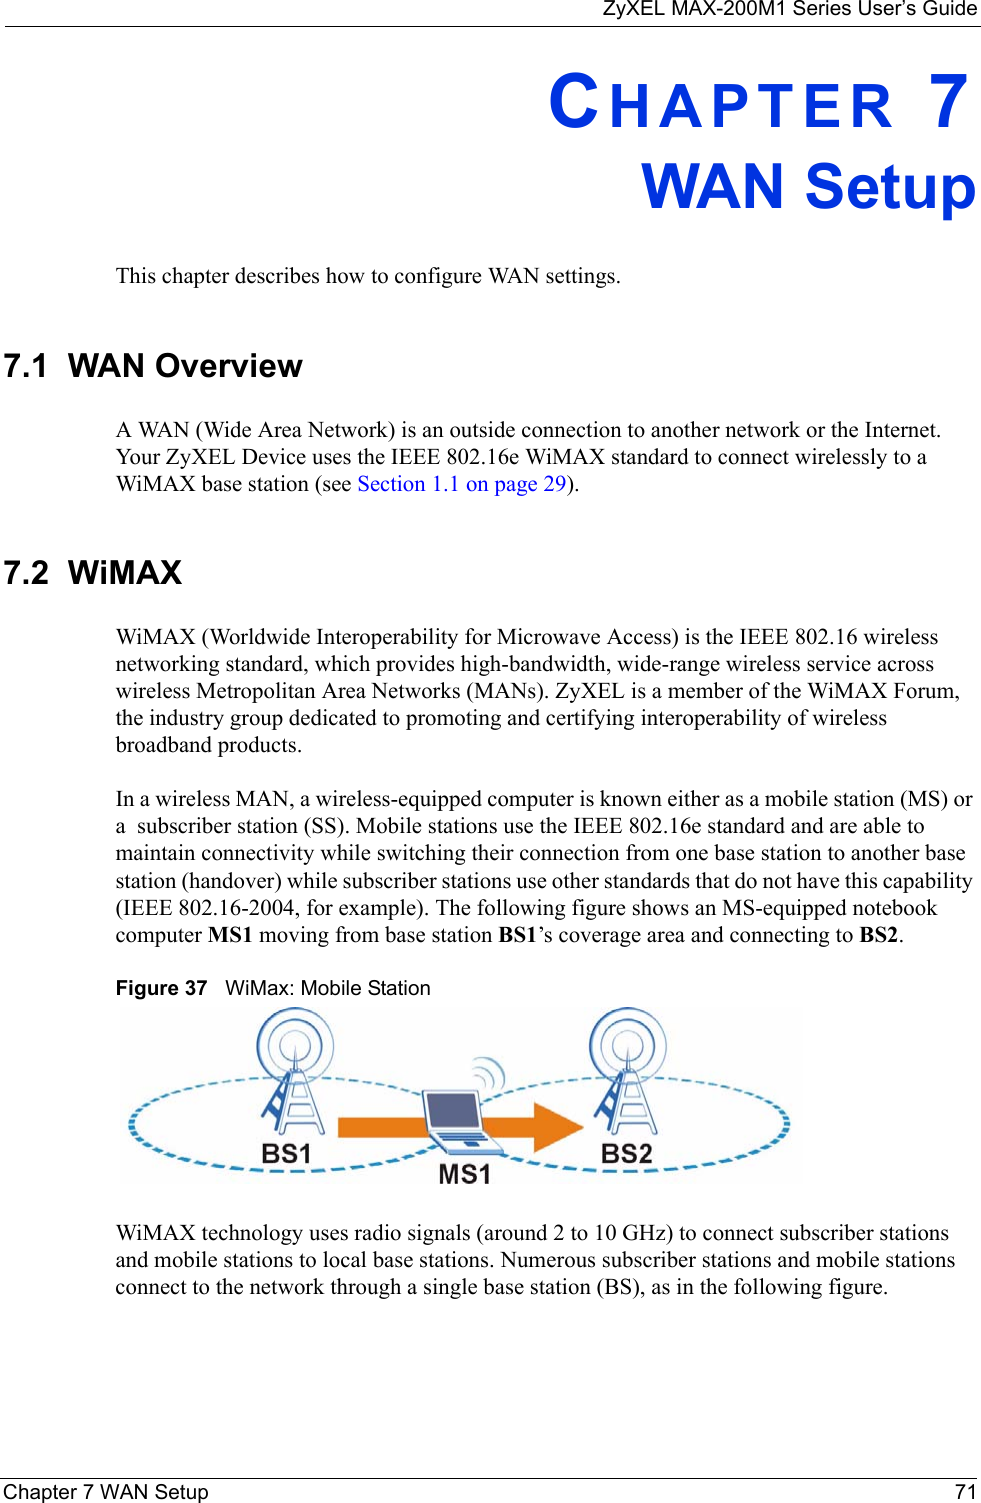 ZyXEL MAX-200M1 Series User’s GuideChapter 7 WAN Setup 71CHAPTER 7WAN SetupThis chapter describes how to configure WAN settings.7.1  WAN Overview A WAN (Wide Area Network) is an outside connection to another network or the Internet. Your ZyXEL Device uses the IEEE 802.16e WiMAX standard to connect wirelessly to a WiMAX base station (see Section 1.1 on page 29).7.2  WiMAX WiMAX (Worldwide Interoperability for Microwave Access) is the IEEE 802.16 wireless networking standard, which provides high-bandwidth, wide-range wireless service across wireless Metropolitan Area Networks (MANs). ZyXEL is a member of the WiMAX Forum, the industry group dedicated to promoting and certifying interoperability of wireless broadband products.In a wireless MAN, a wireless-equipped computer is known either as a mobile station (MS) or a  subscriber station (SS). Mobile stations use the IEEE 802.16e standard and are able to maintain connectivity while switching their connection from one base station to another base station (handover) while subscriber stations use other standards that do not have this capability (IEEE 802.16-2004, for example). The following figure shows an MS-equipped notebook computer MS1 moving from base station BS1’s coverage area and connecting to BS2.Figure 37   WiMax: Mobile StationWiMAX technology uses radio signals (around 2 to 10 GHz) to connect subscriber stations and mobile stations to local base stations. Numerous subscriber stations and mobile stations connect to the network through a single base station (BS), as in the following figure. 